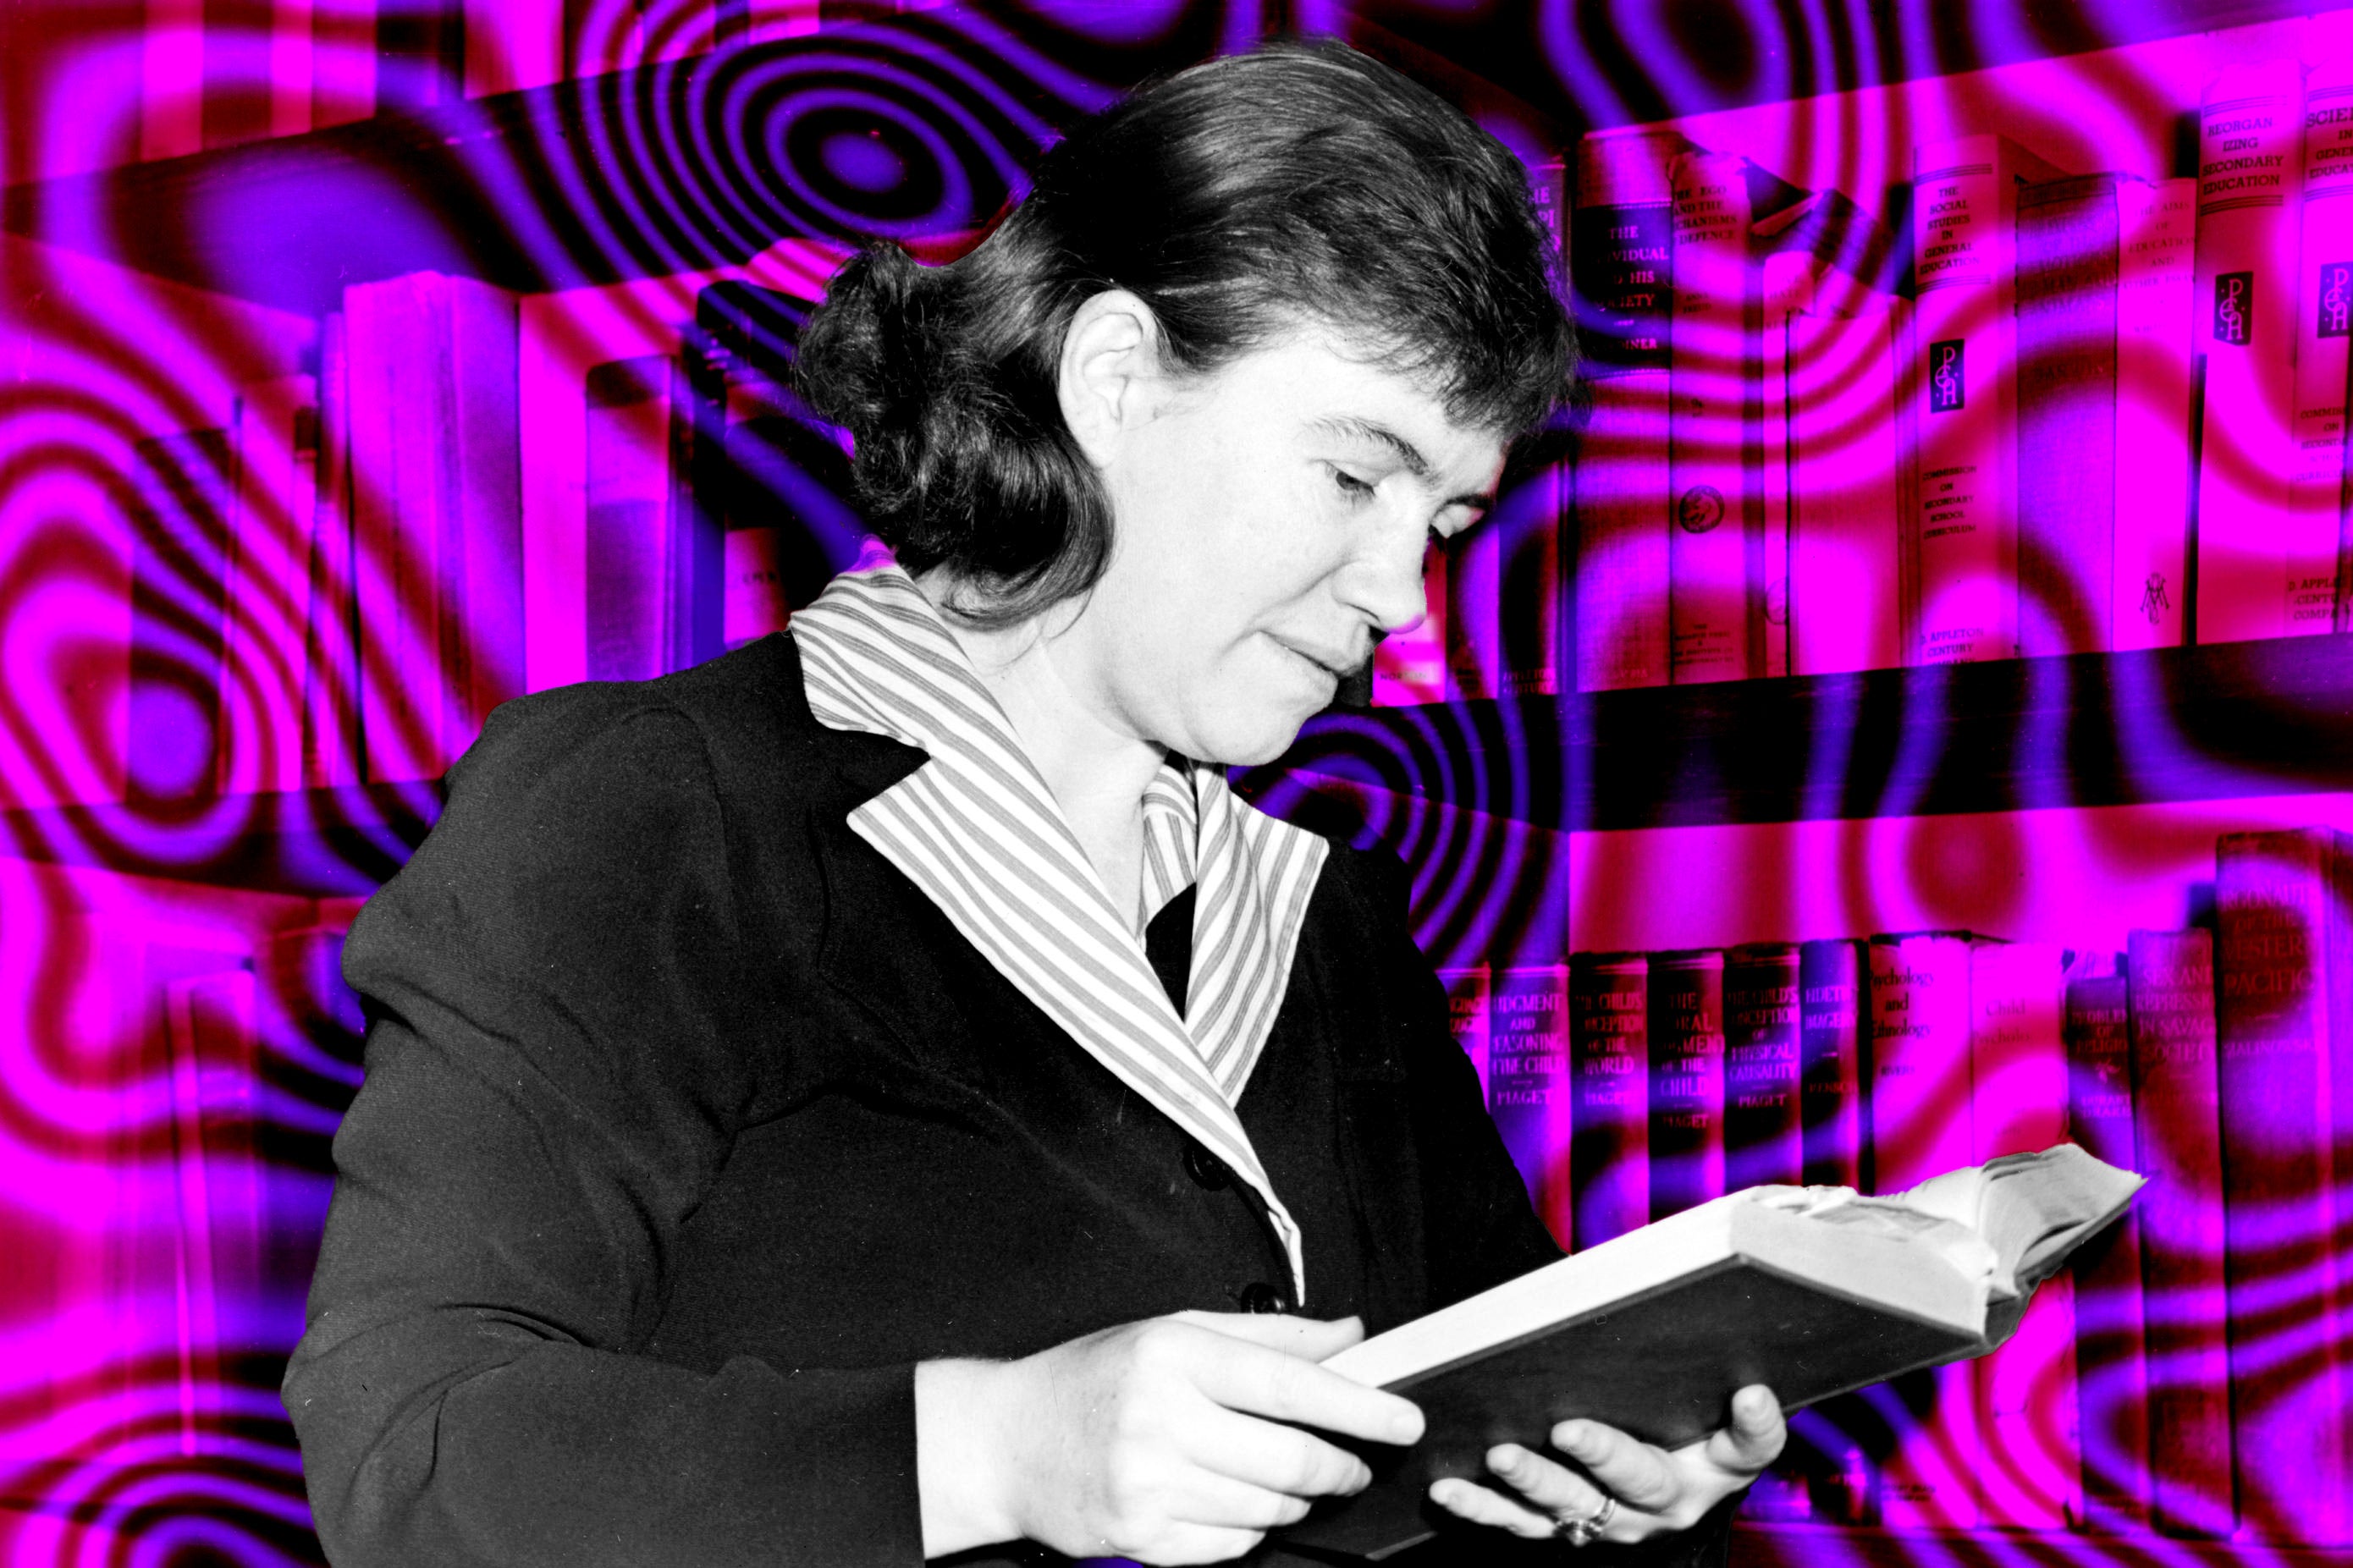  Margaret Mead reading a book in a library with a purple psychedelic pattern behind her.